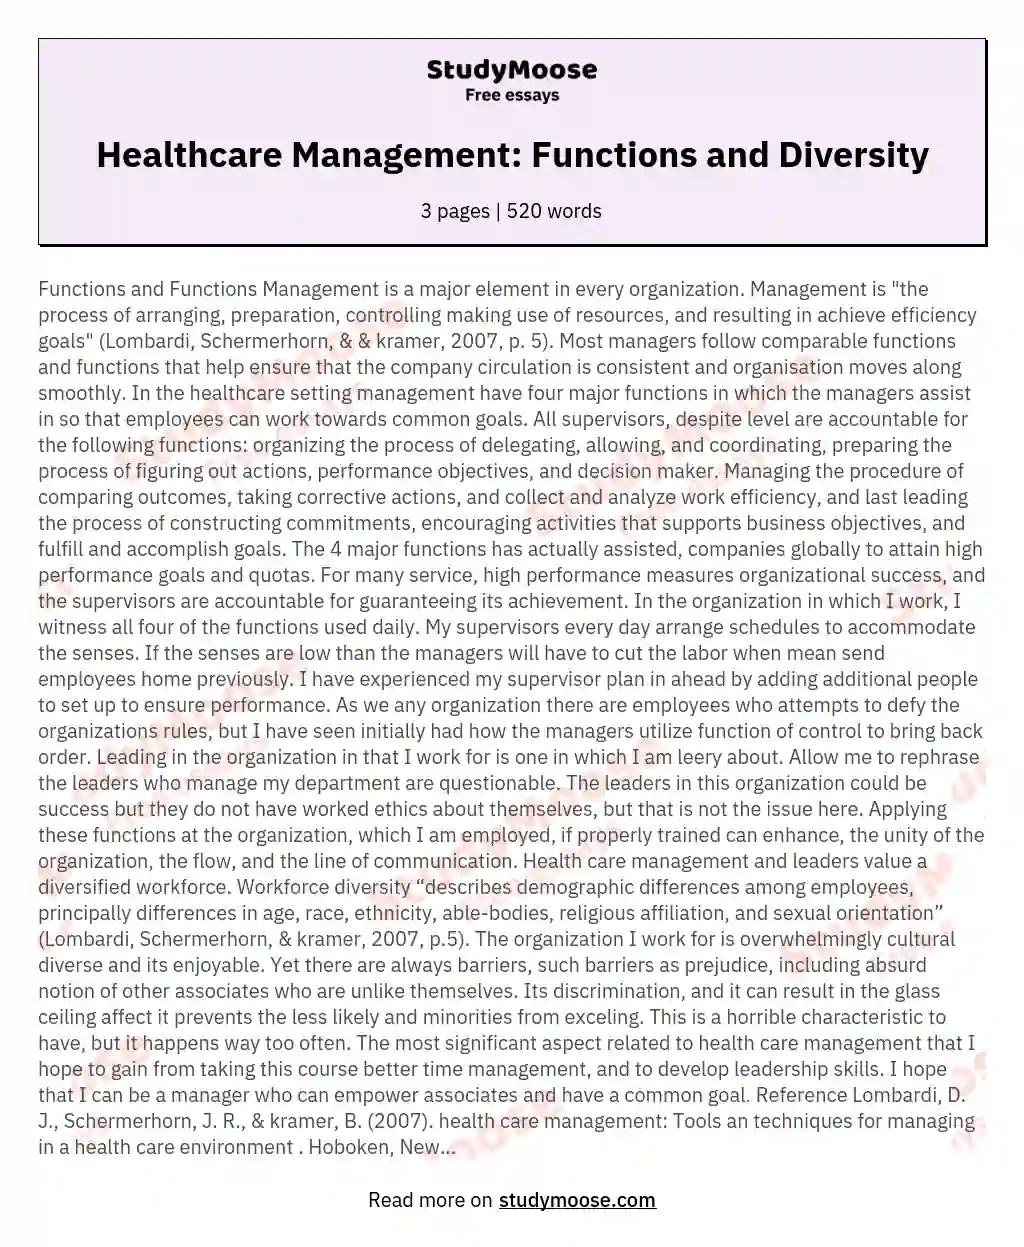 Healthcare Management: Functions and Diversity essay